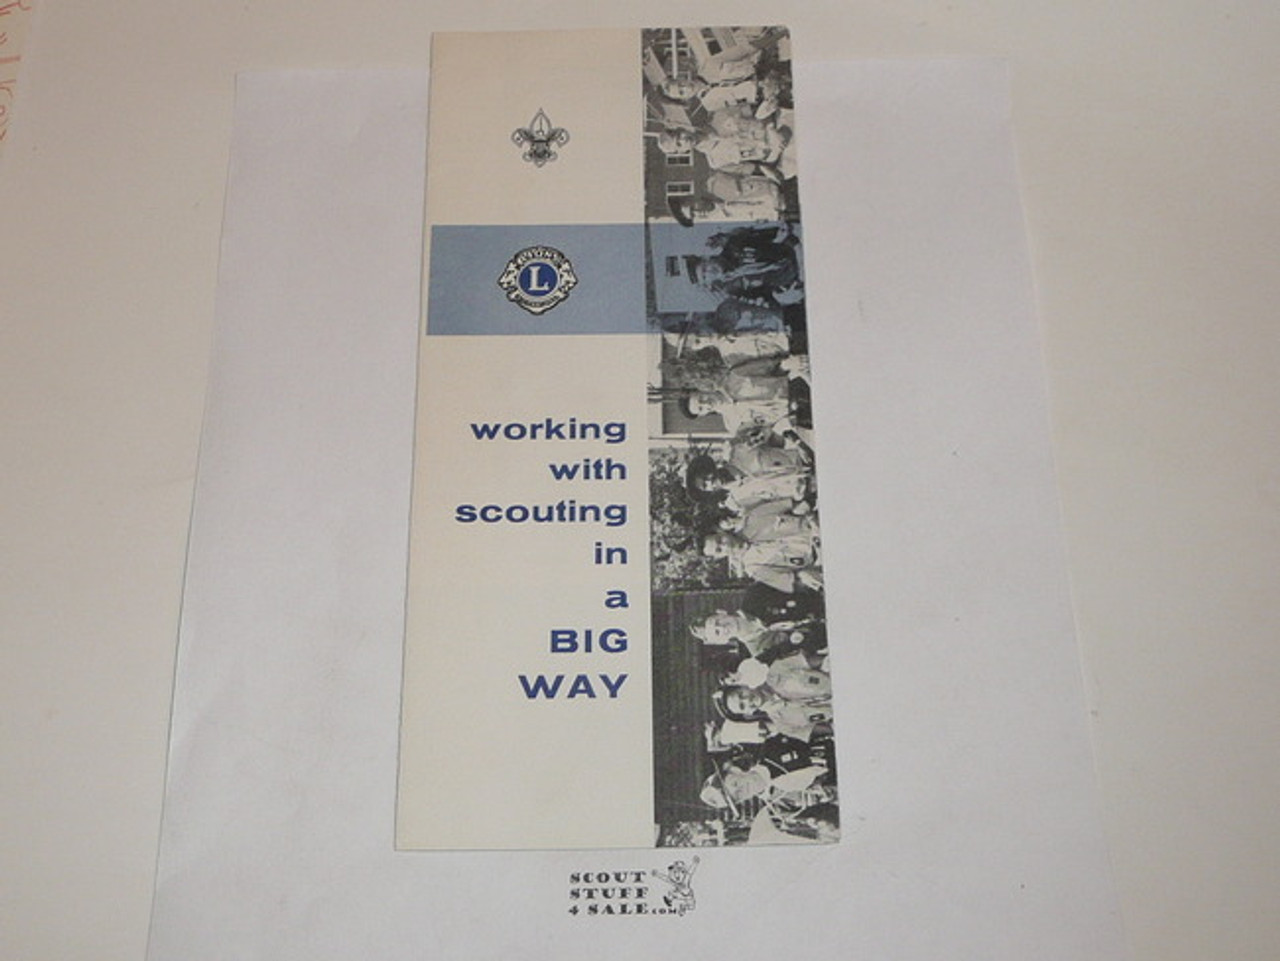 1963 Lions International Working with Scouting in a Big Way Brochure